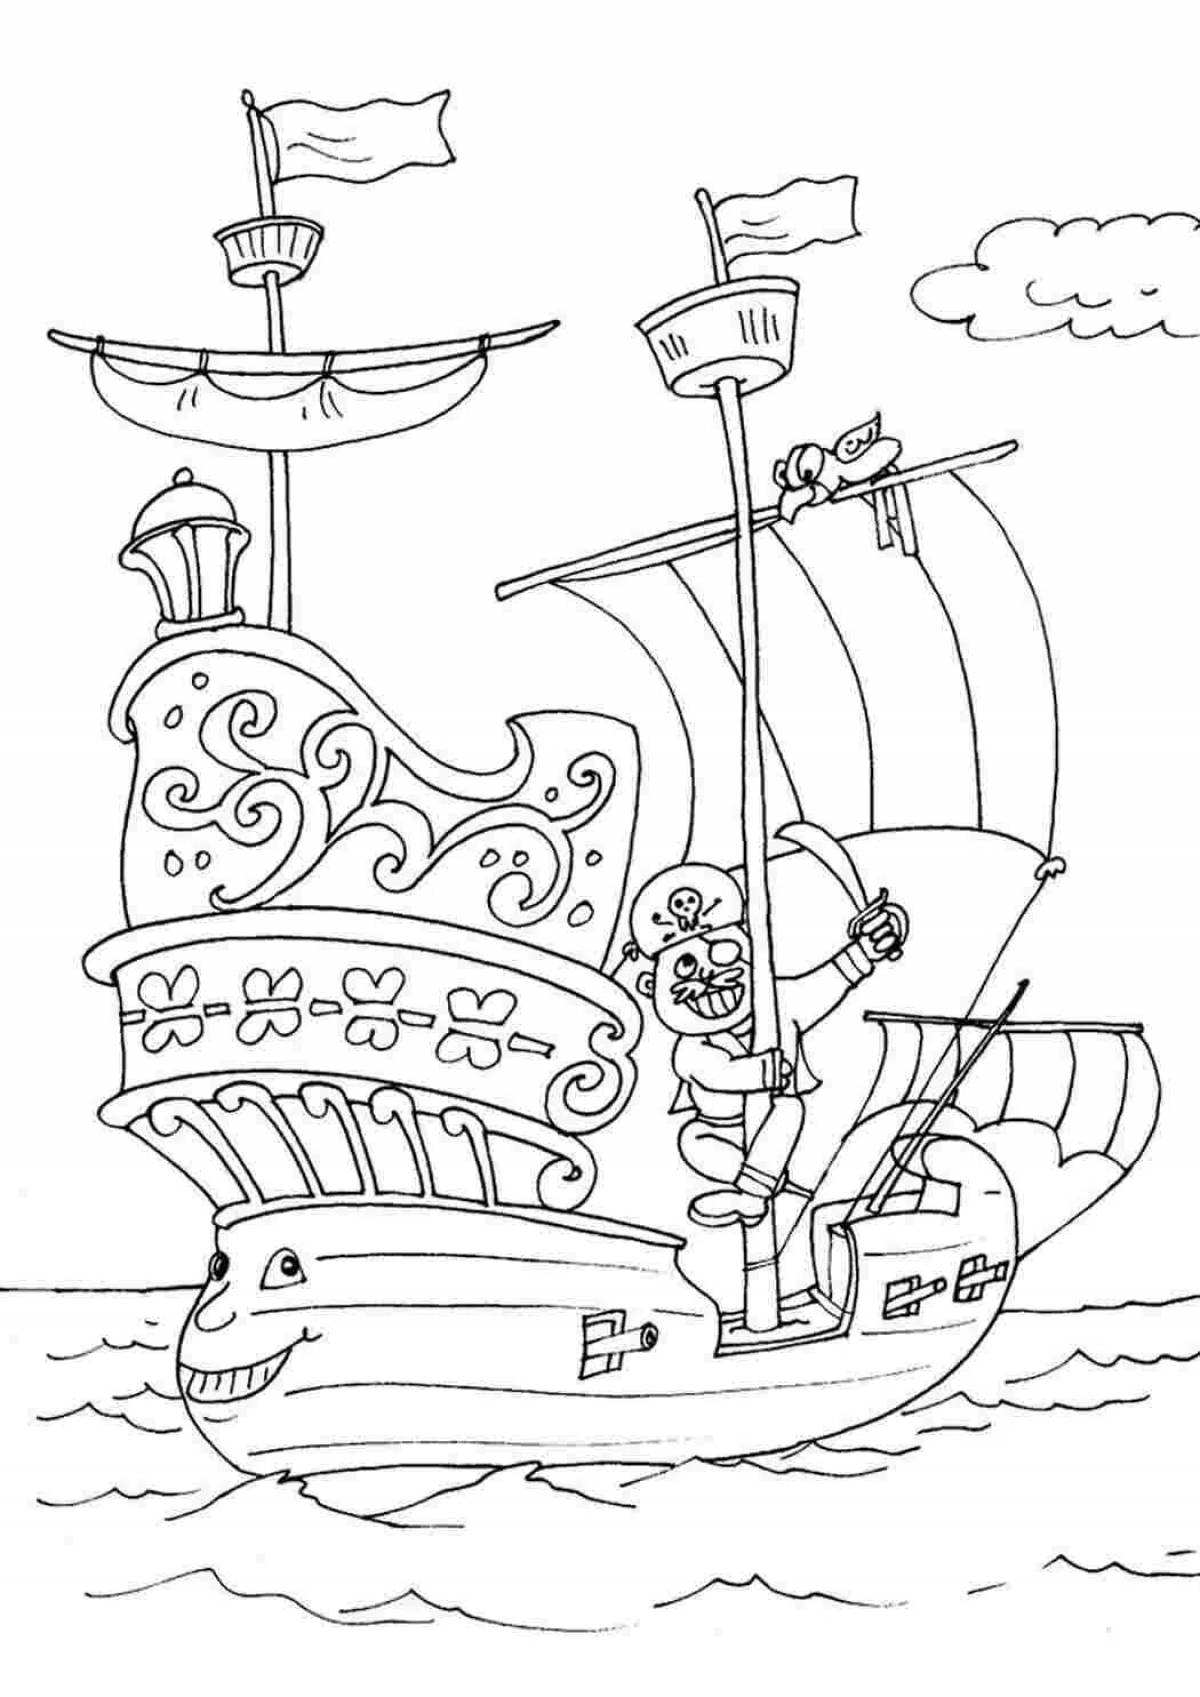 Pirate ship for kids #2